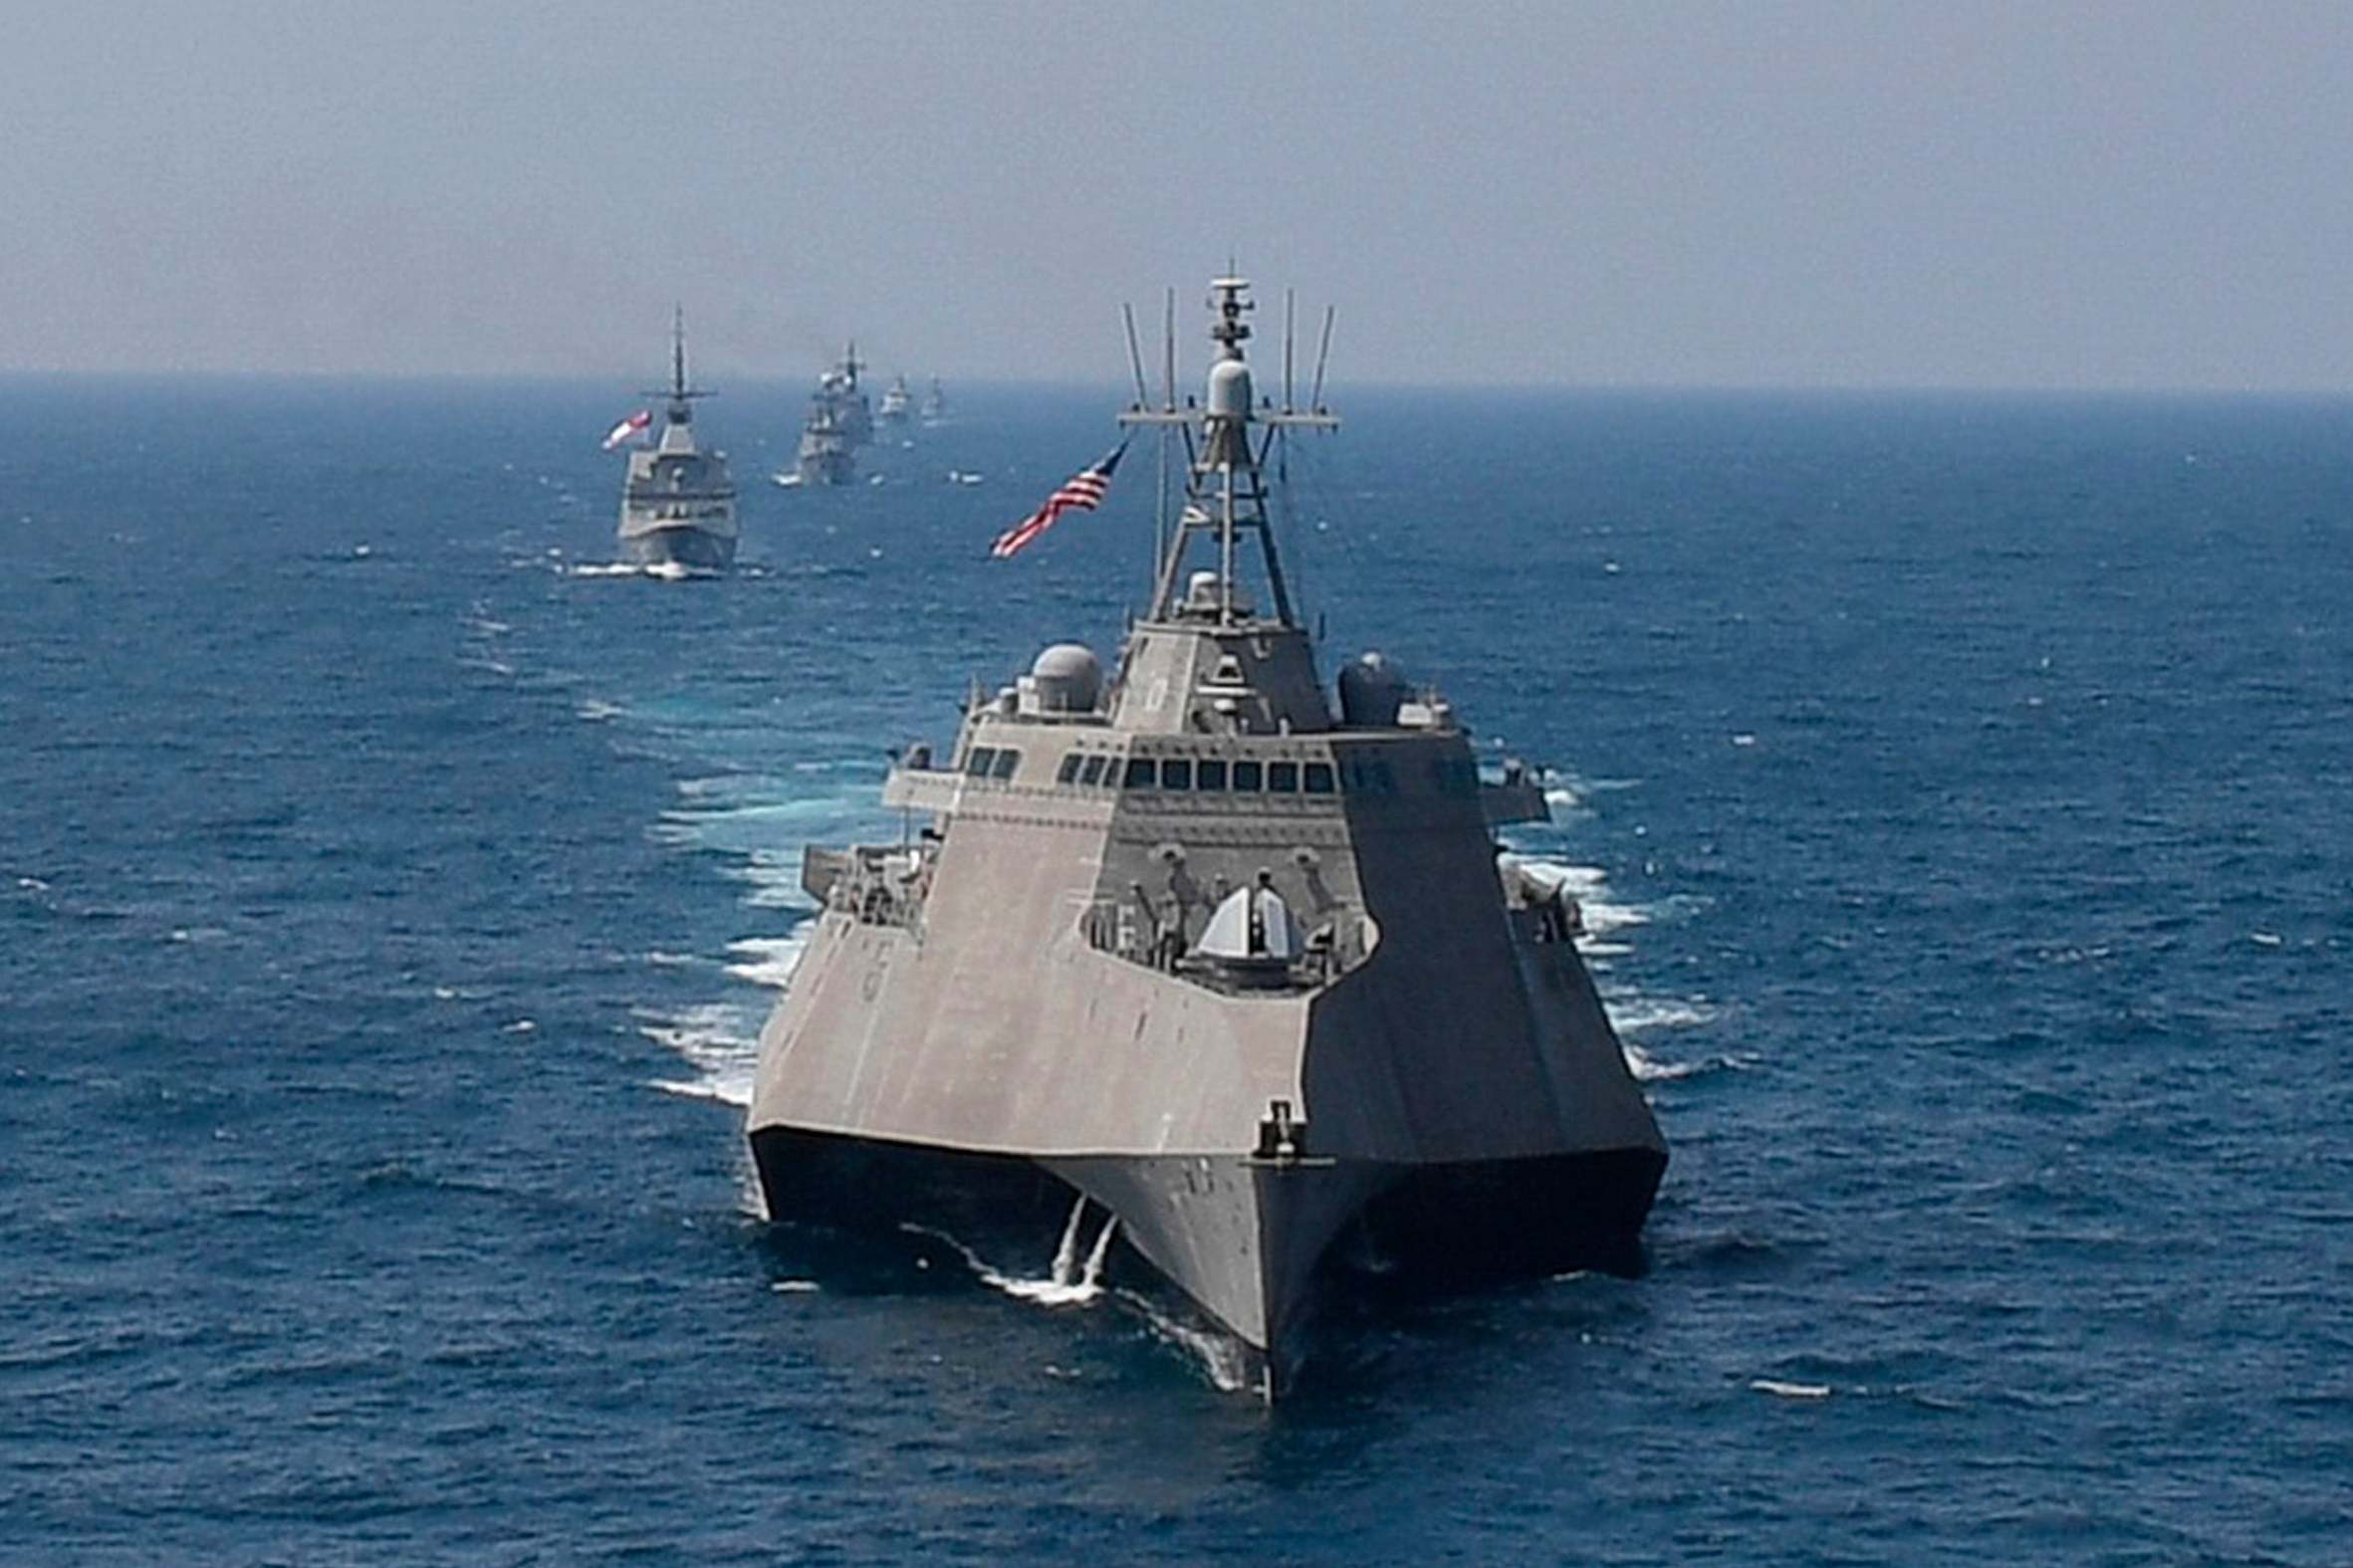 US navy’s USS Montgomery sails in formation during maritime exercise in the gulf of Thailand